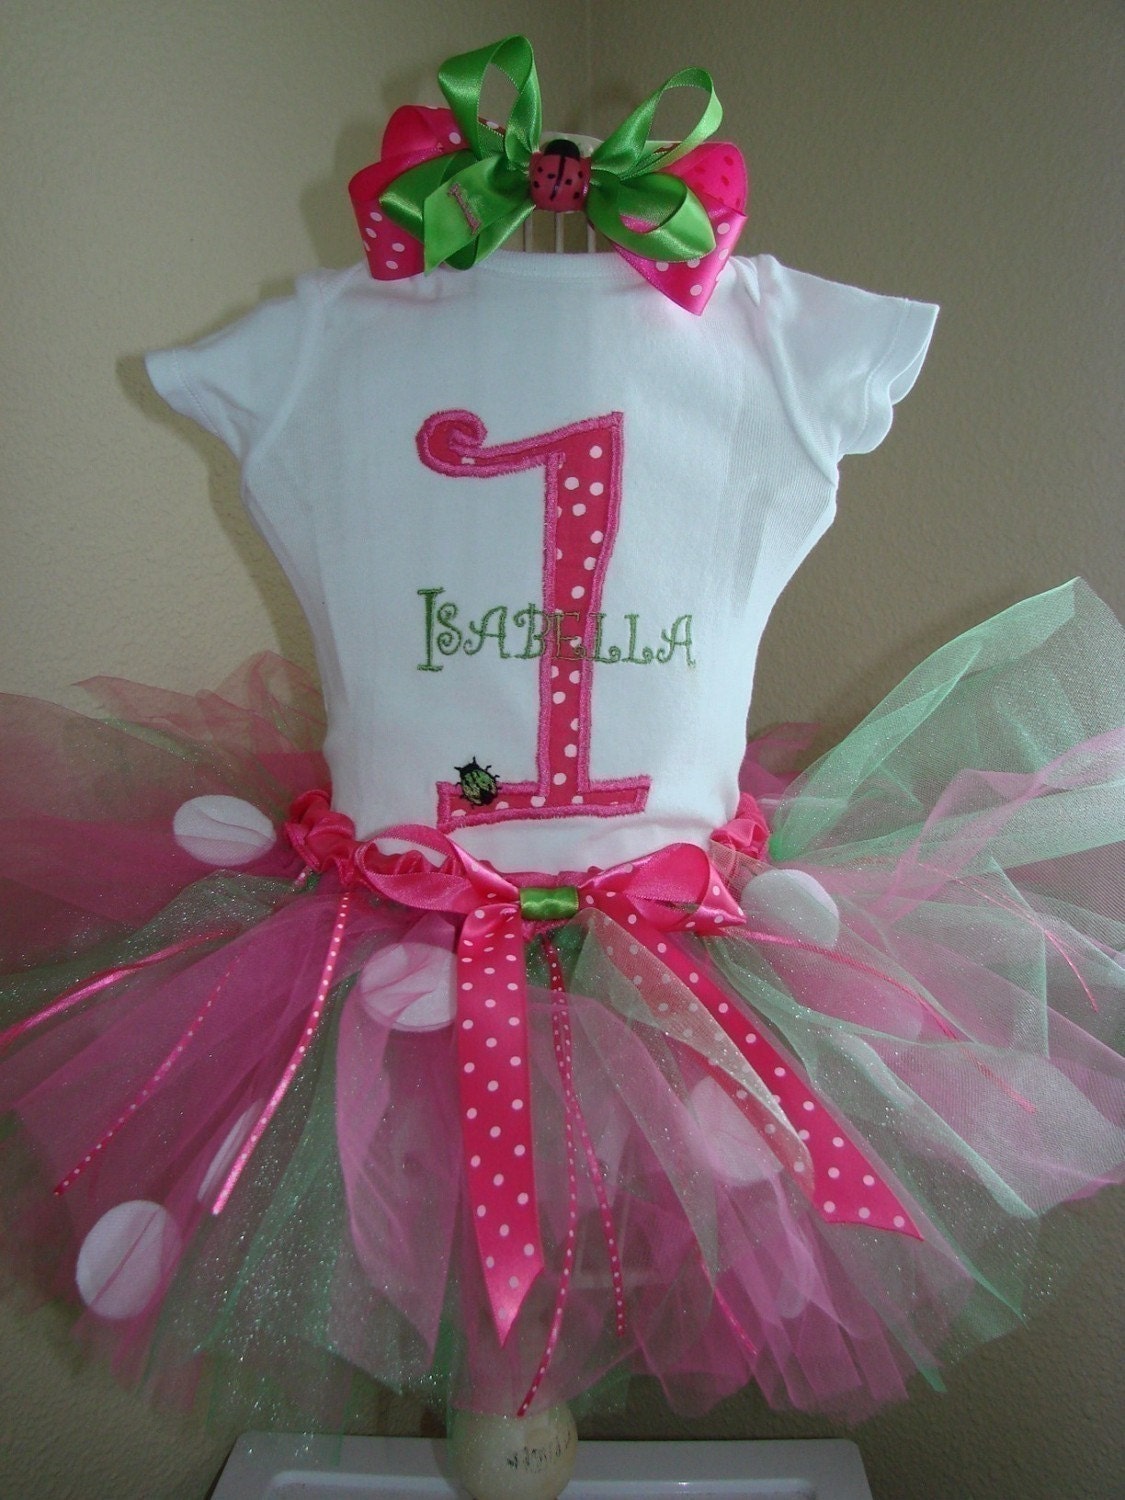 Ladybug Birthday Tutu Outfit Pink and green monogram name, Boutique bow, head band, Great for 1st 2nd 3rd Birthdays long or short sleeves